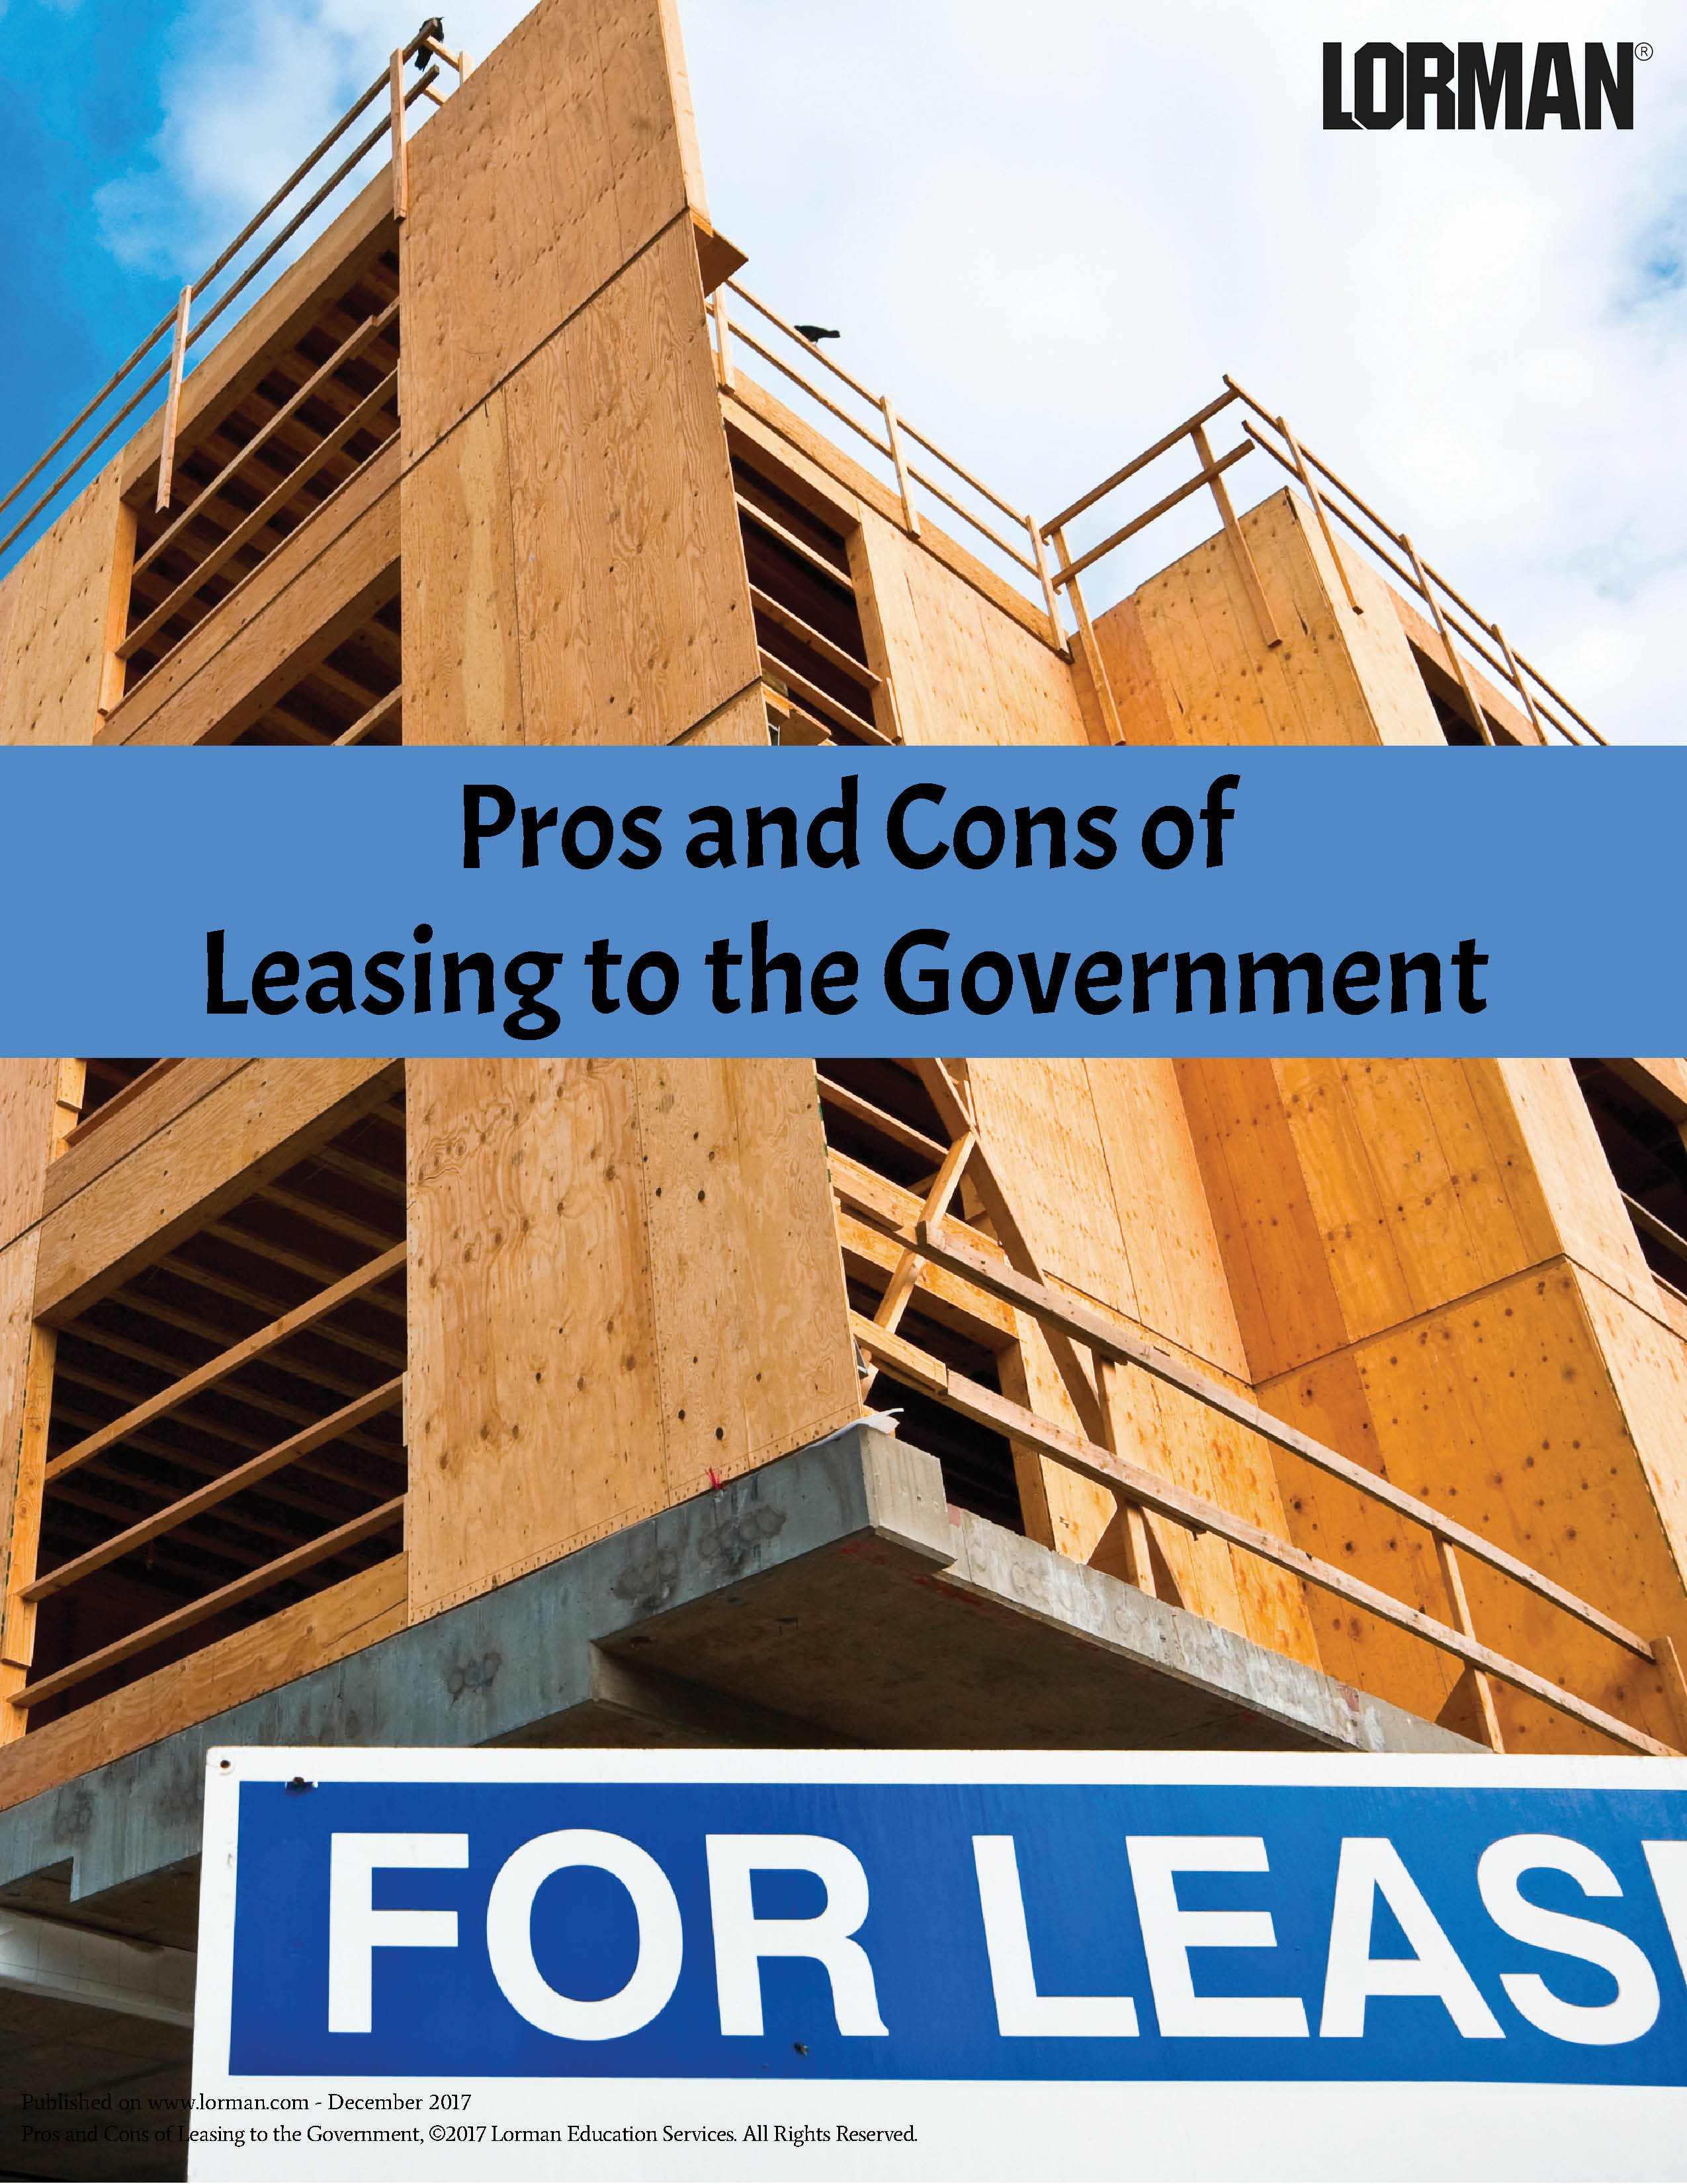 Pros and Cons of Leasing to the Government